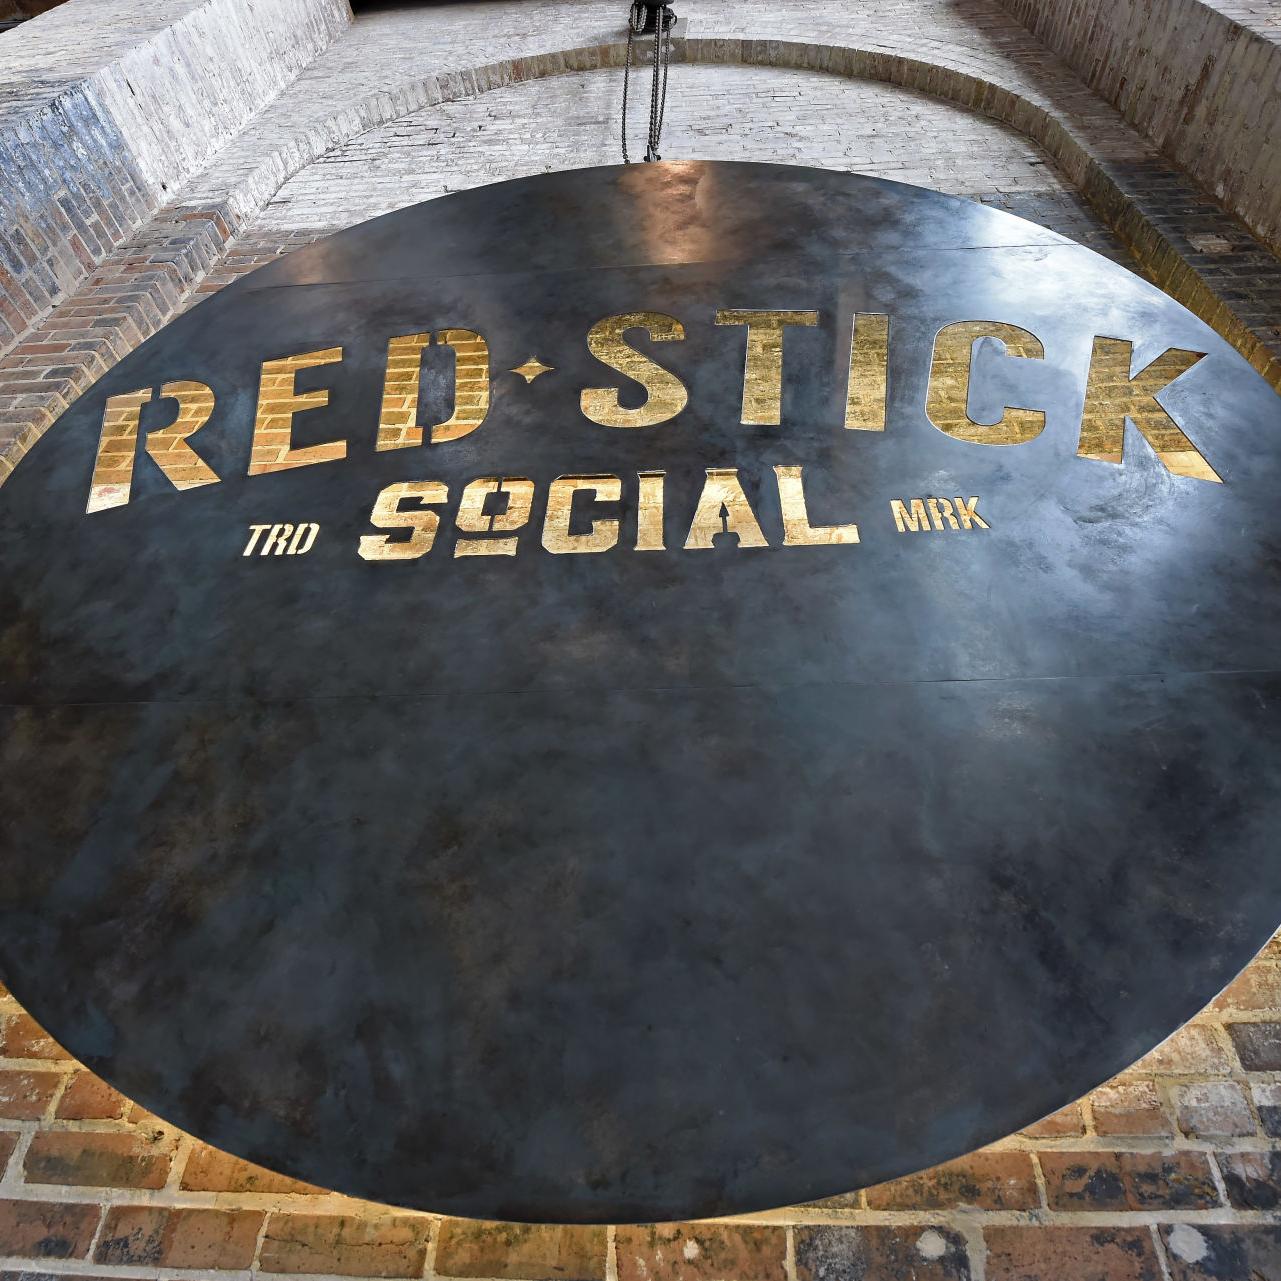 Red Stick Social issues apology, takes down dress code Facebook